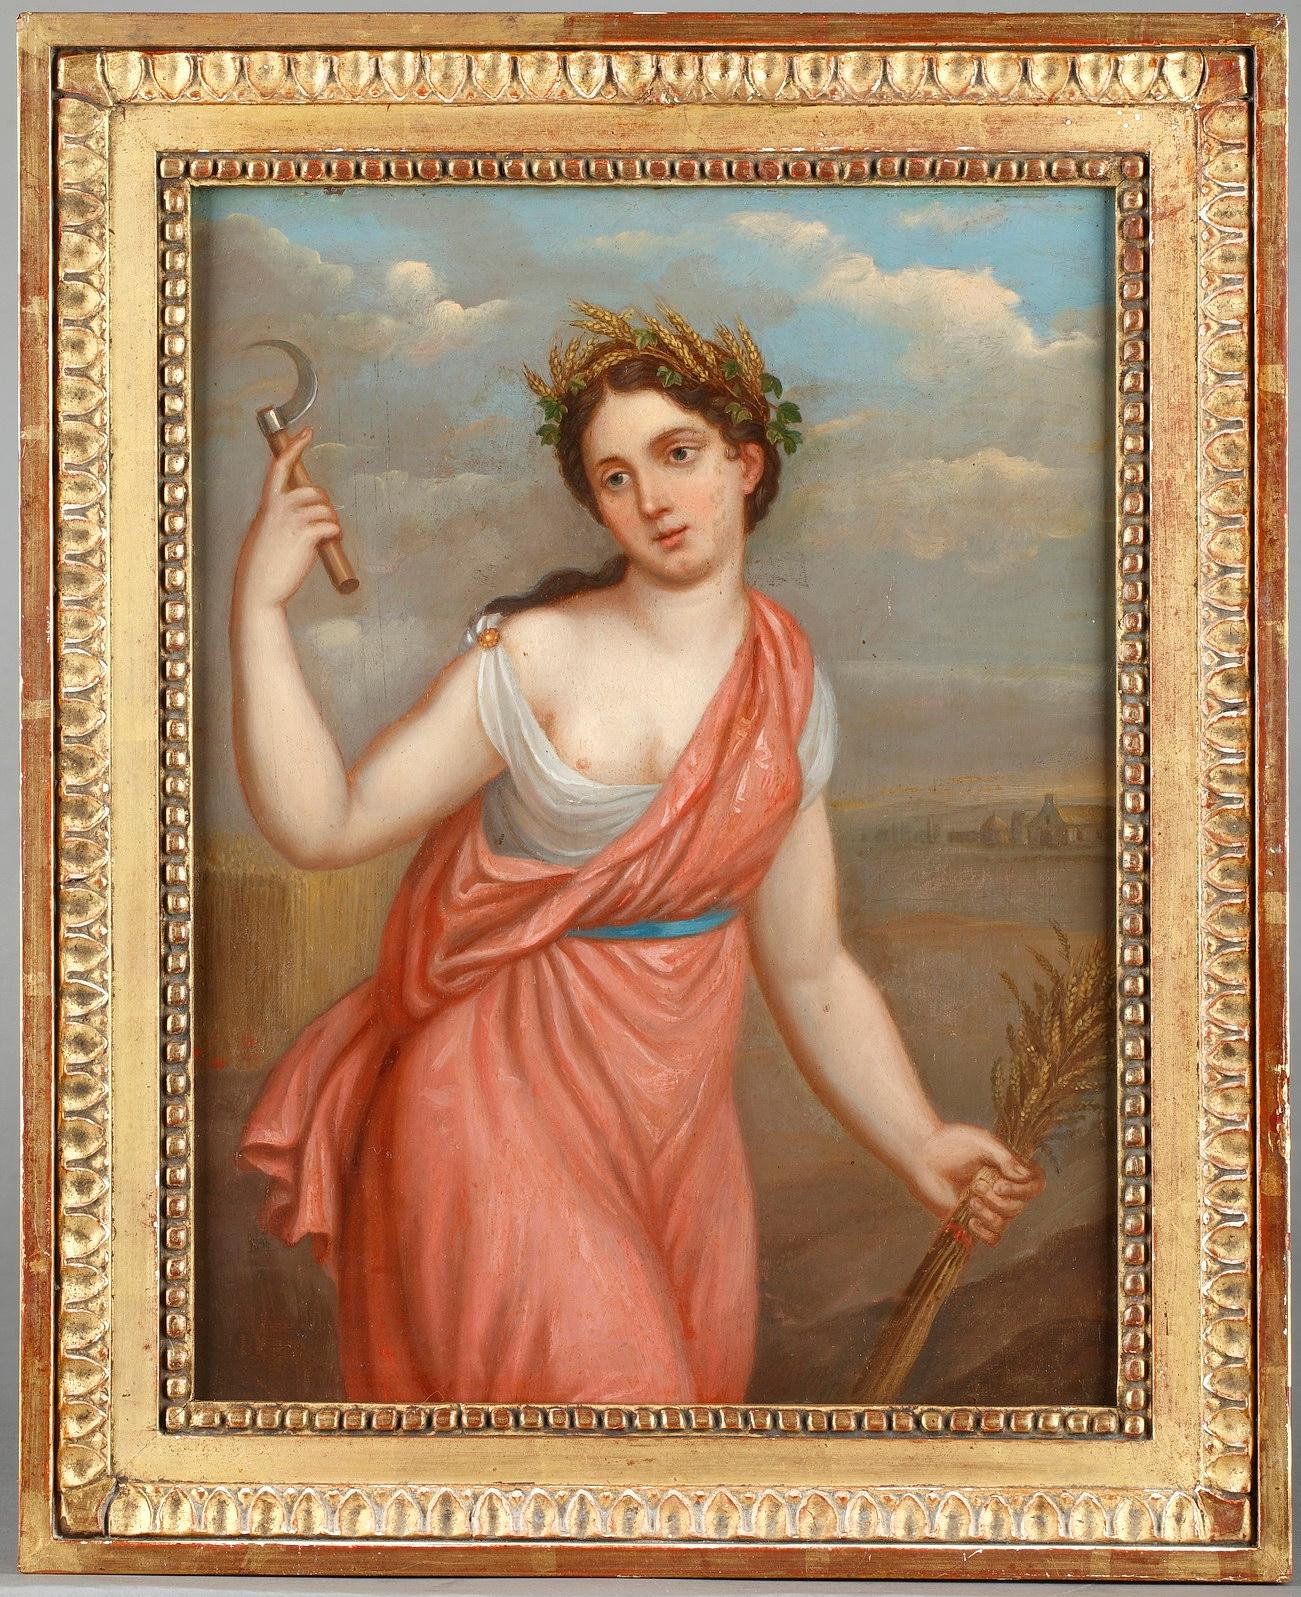 Late 18th-early 19th century oil on cooper paintings featuring The Four Seasons. The allegorical characters are inspired by famous paintings and use the Renaissance iconography, with female figures on a landscape background. The allegory of autumn